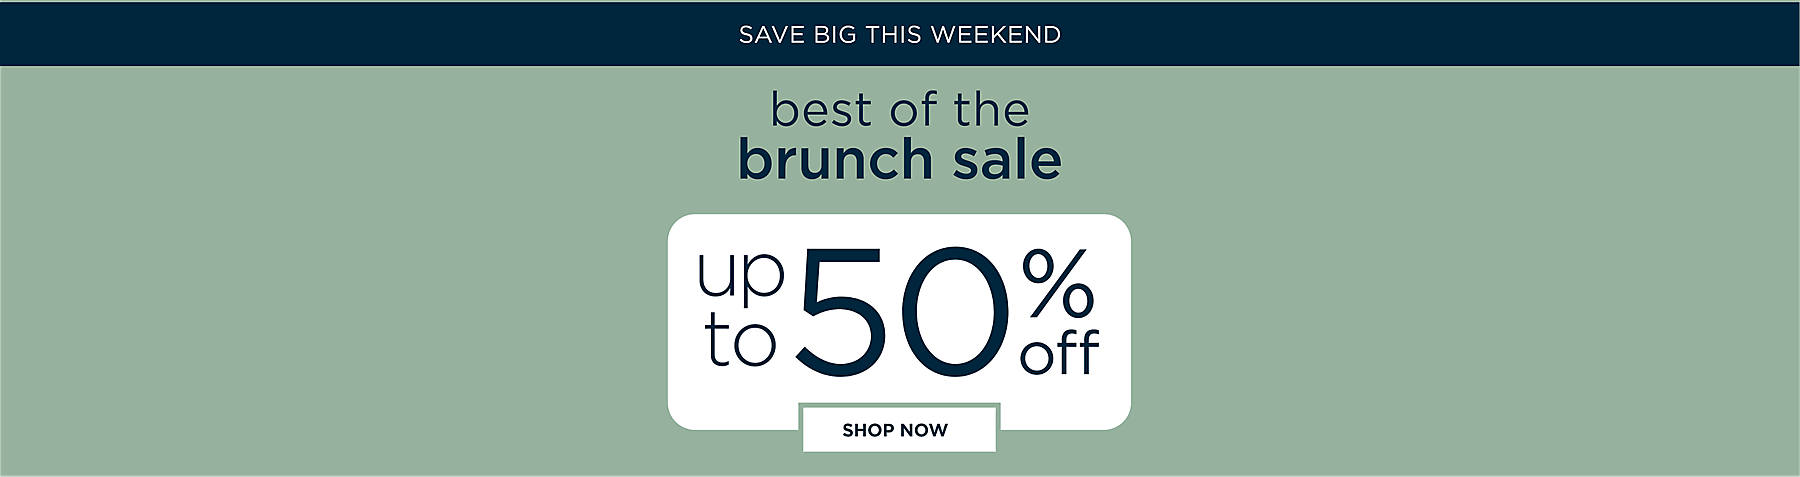 save big this weekend best of the brunch sale up to 50% off